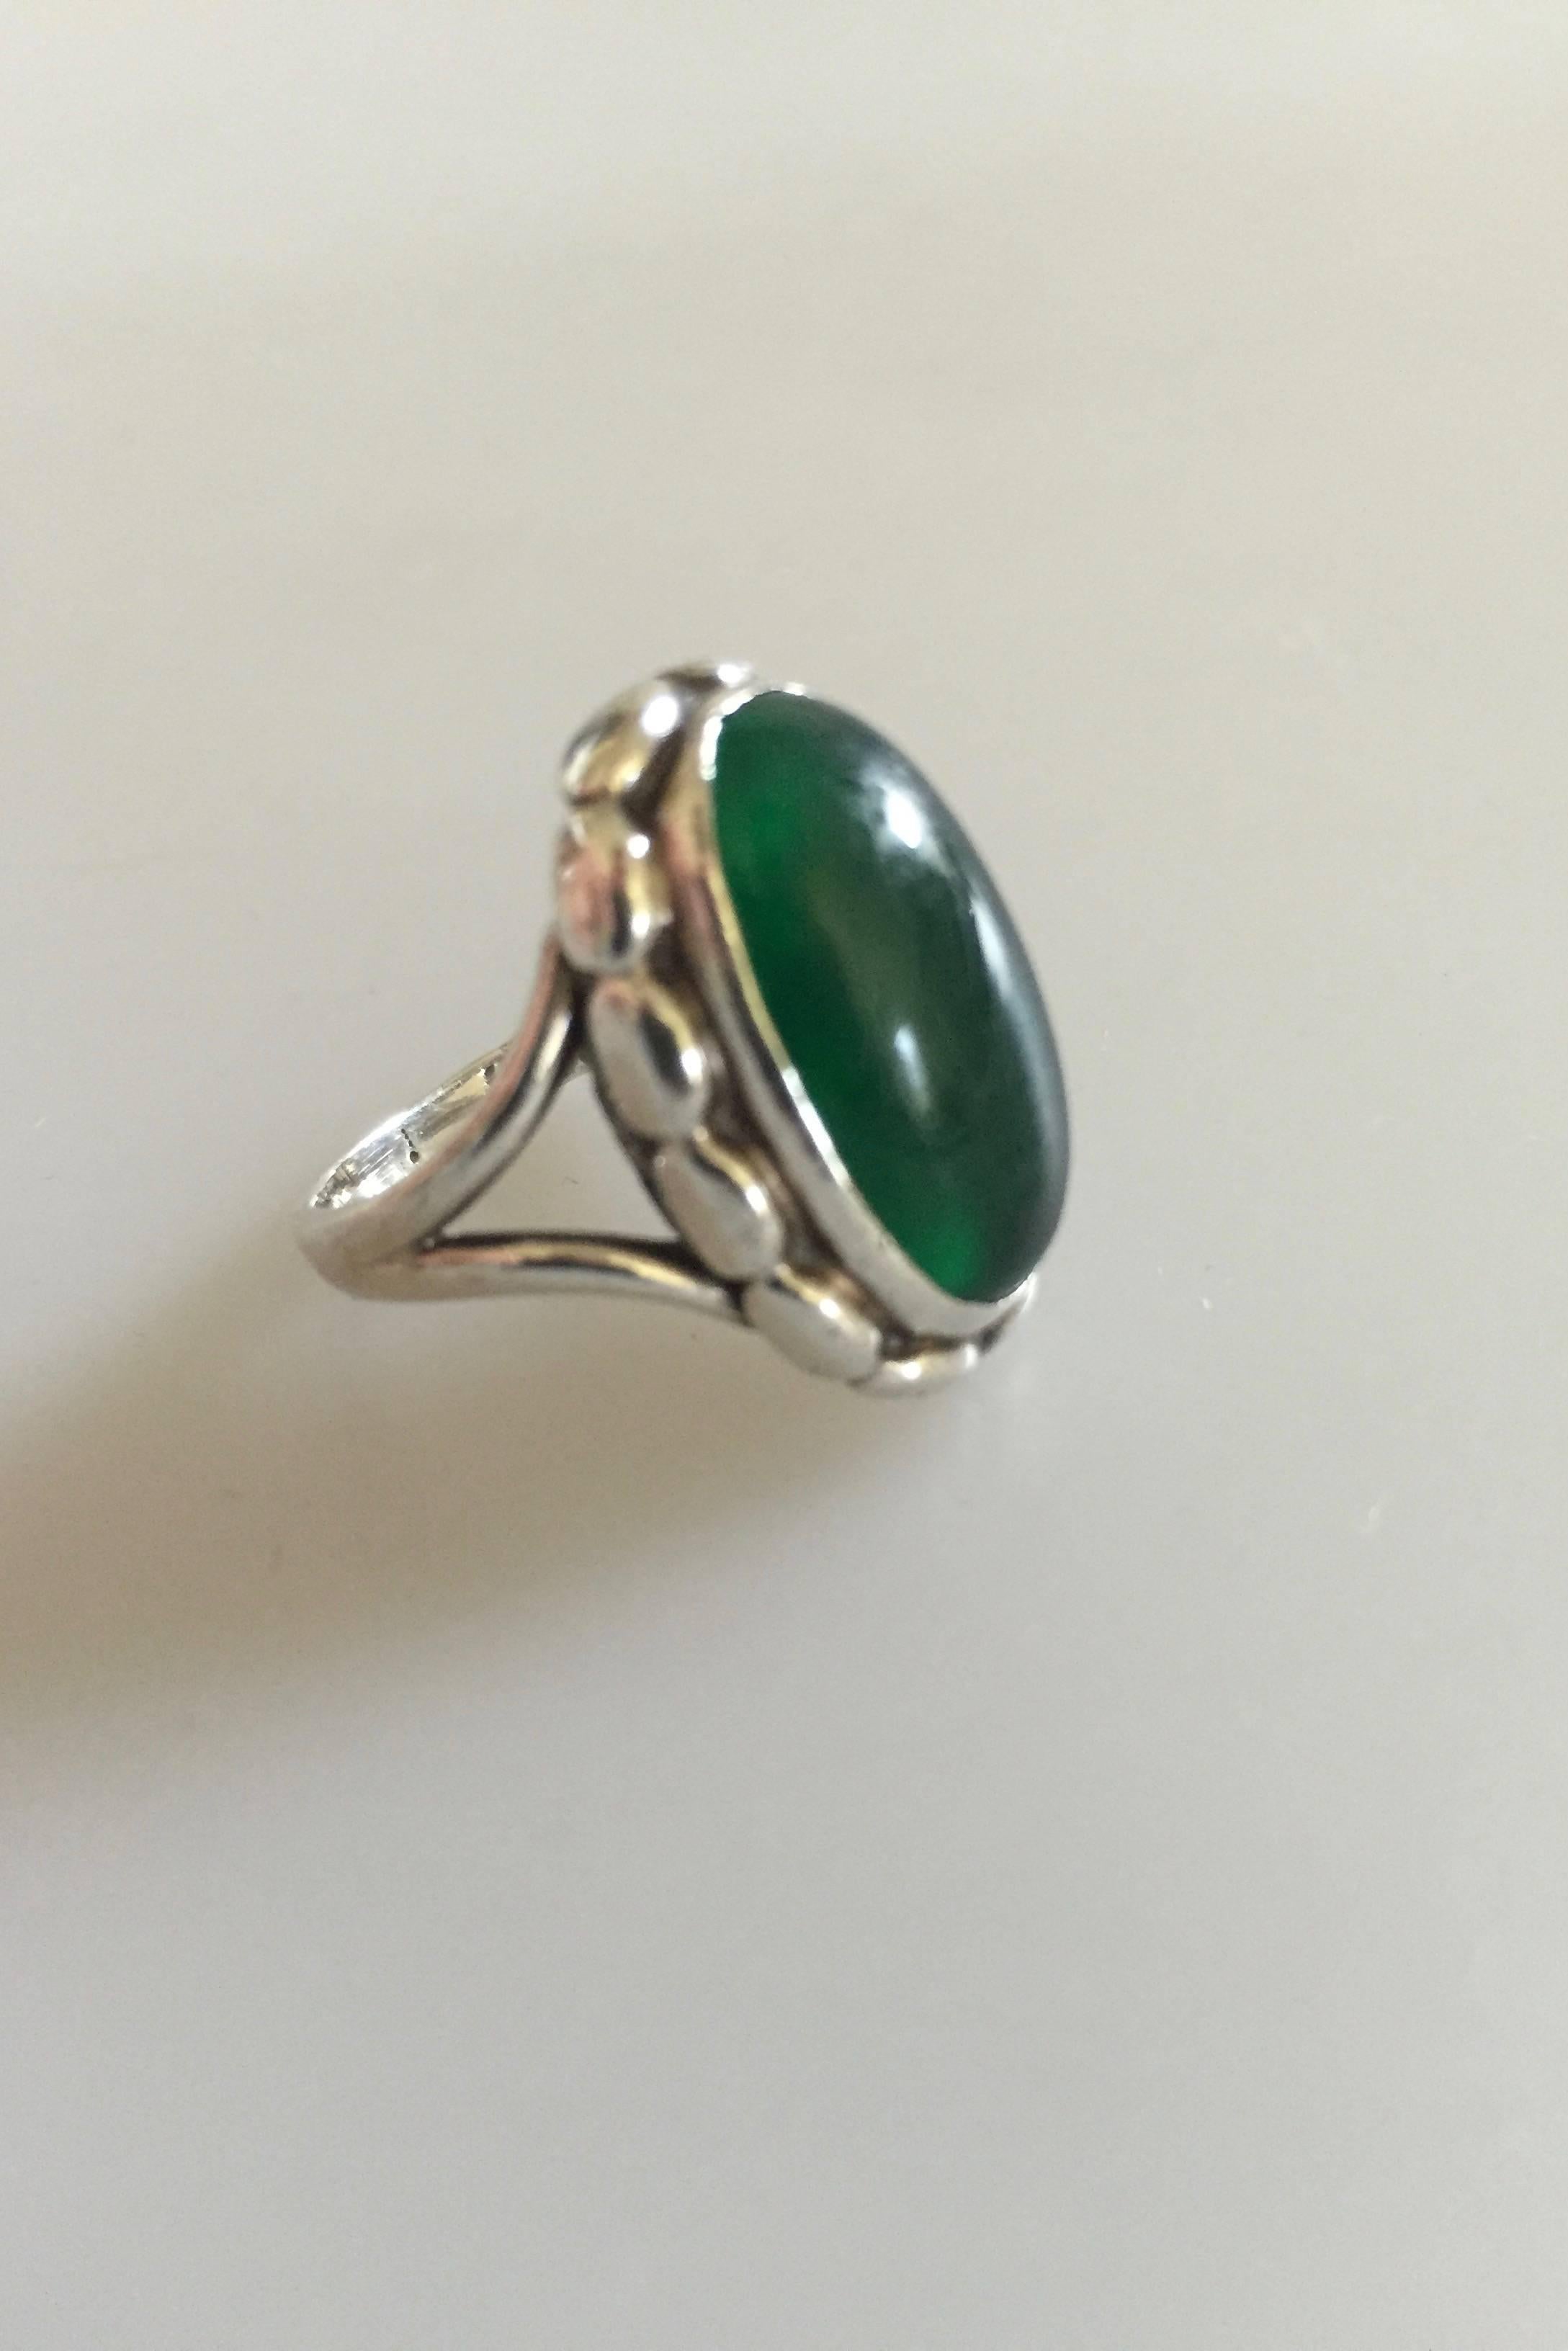 Georg Jensen sterling silver ring #19 with clear green agate. From after 1945. 

Ring size #54.
Stone measures 2 x 1 cm (0 25/32